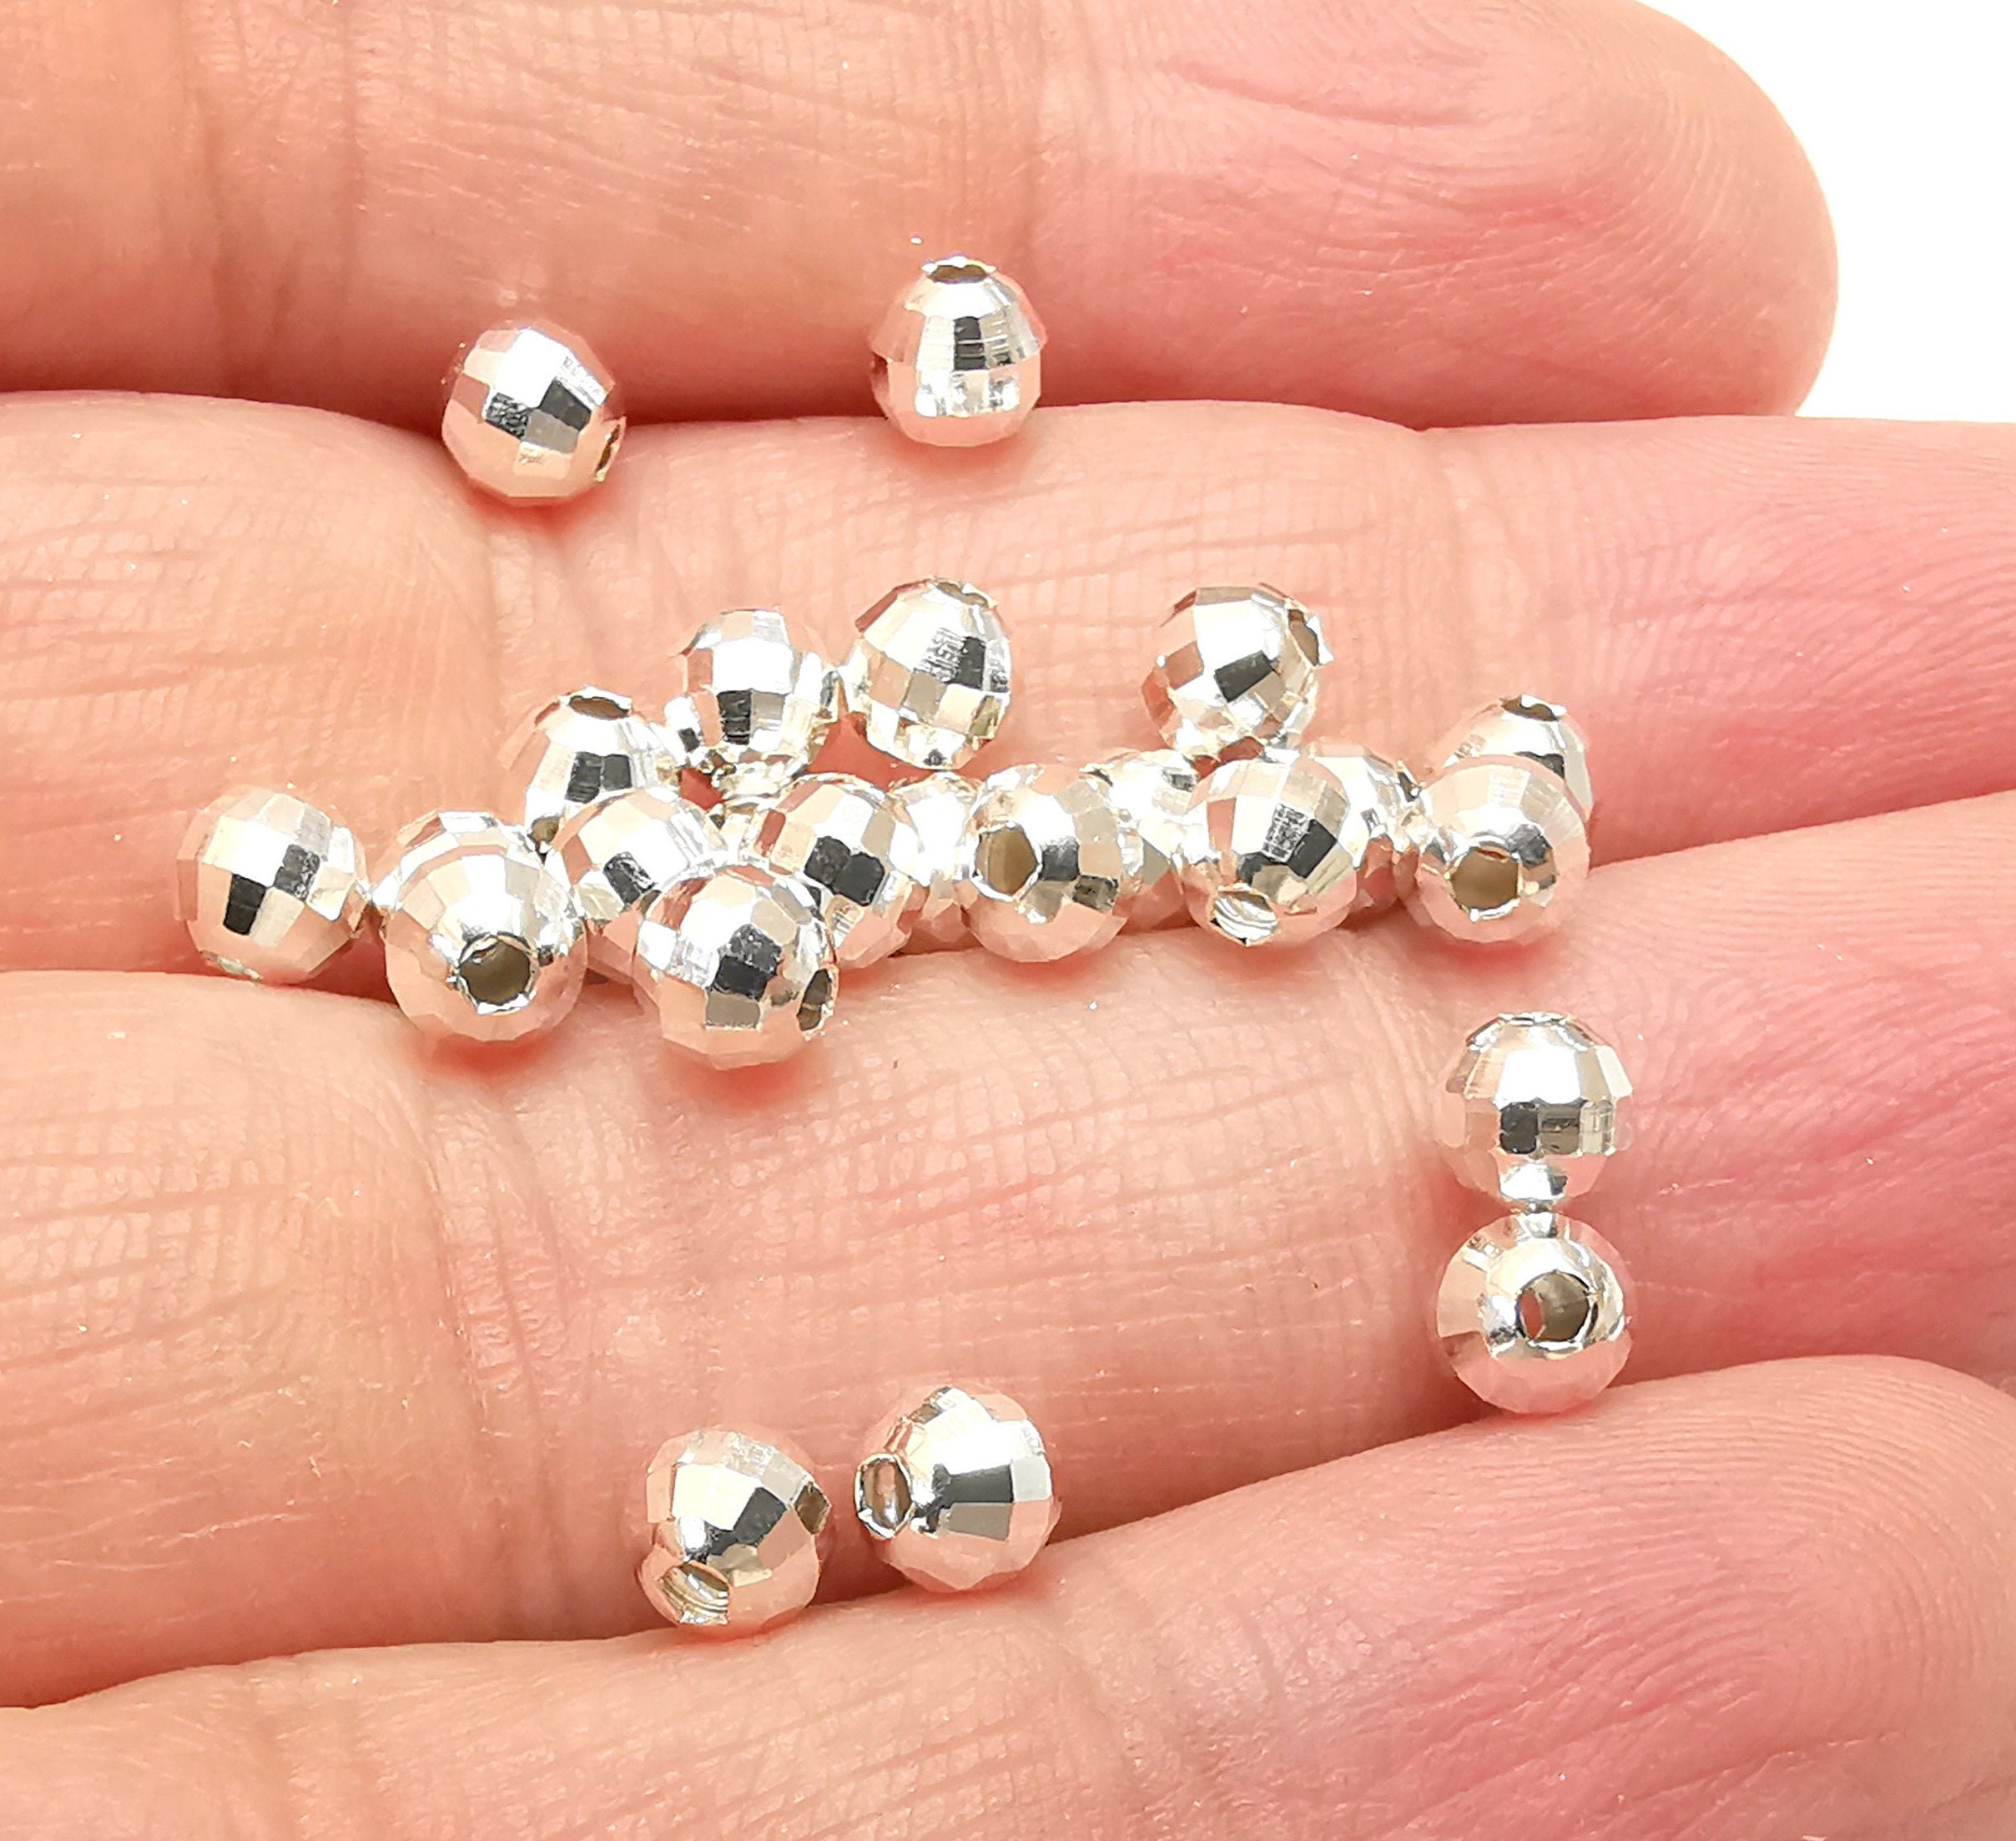  Tacool 100pcs Genuine 925 Sterling Silver Round Ball Beads for  Jewelry Making Findings (2.5mm)